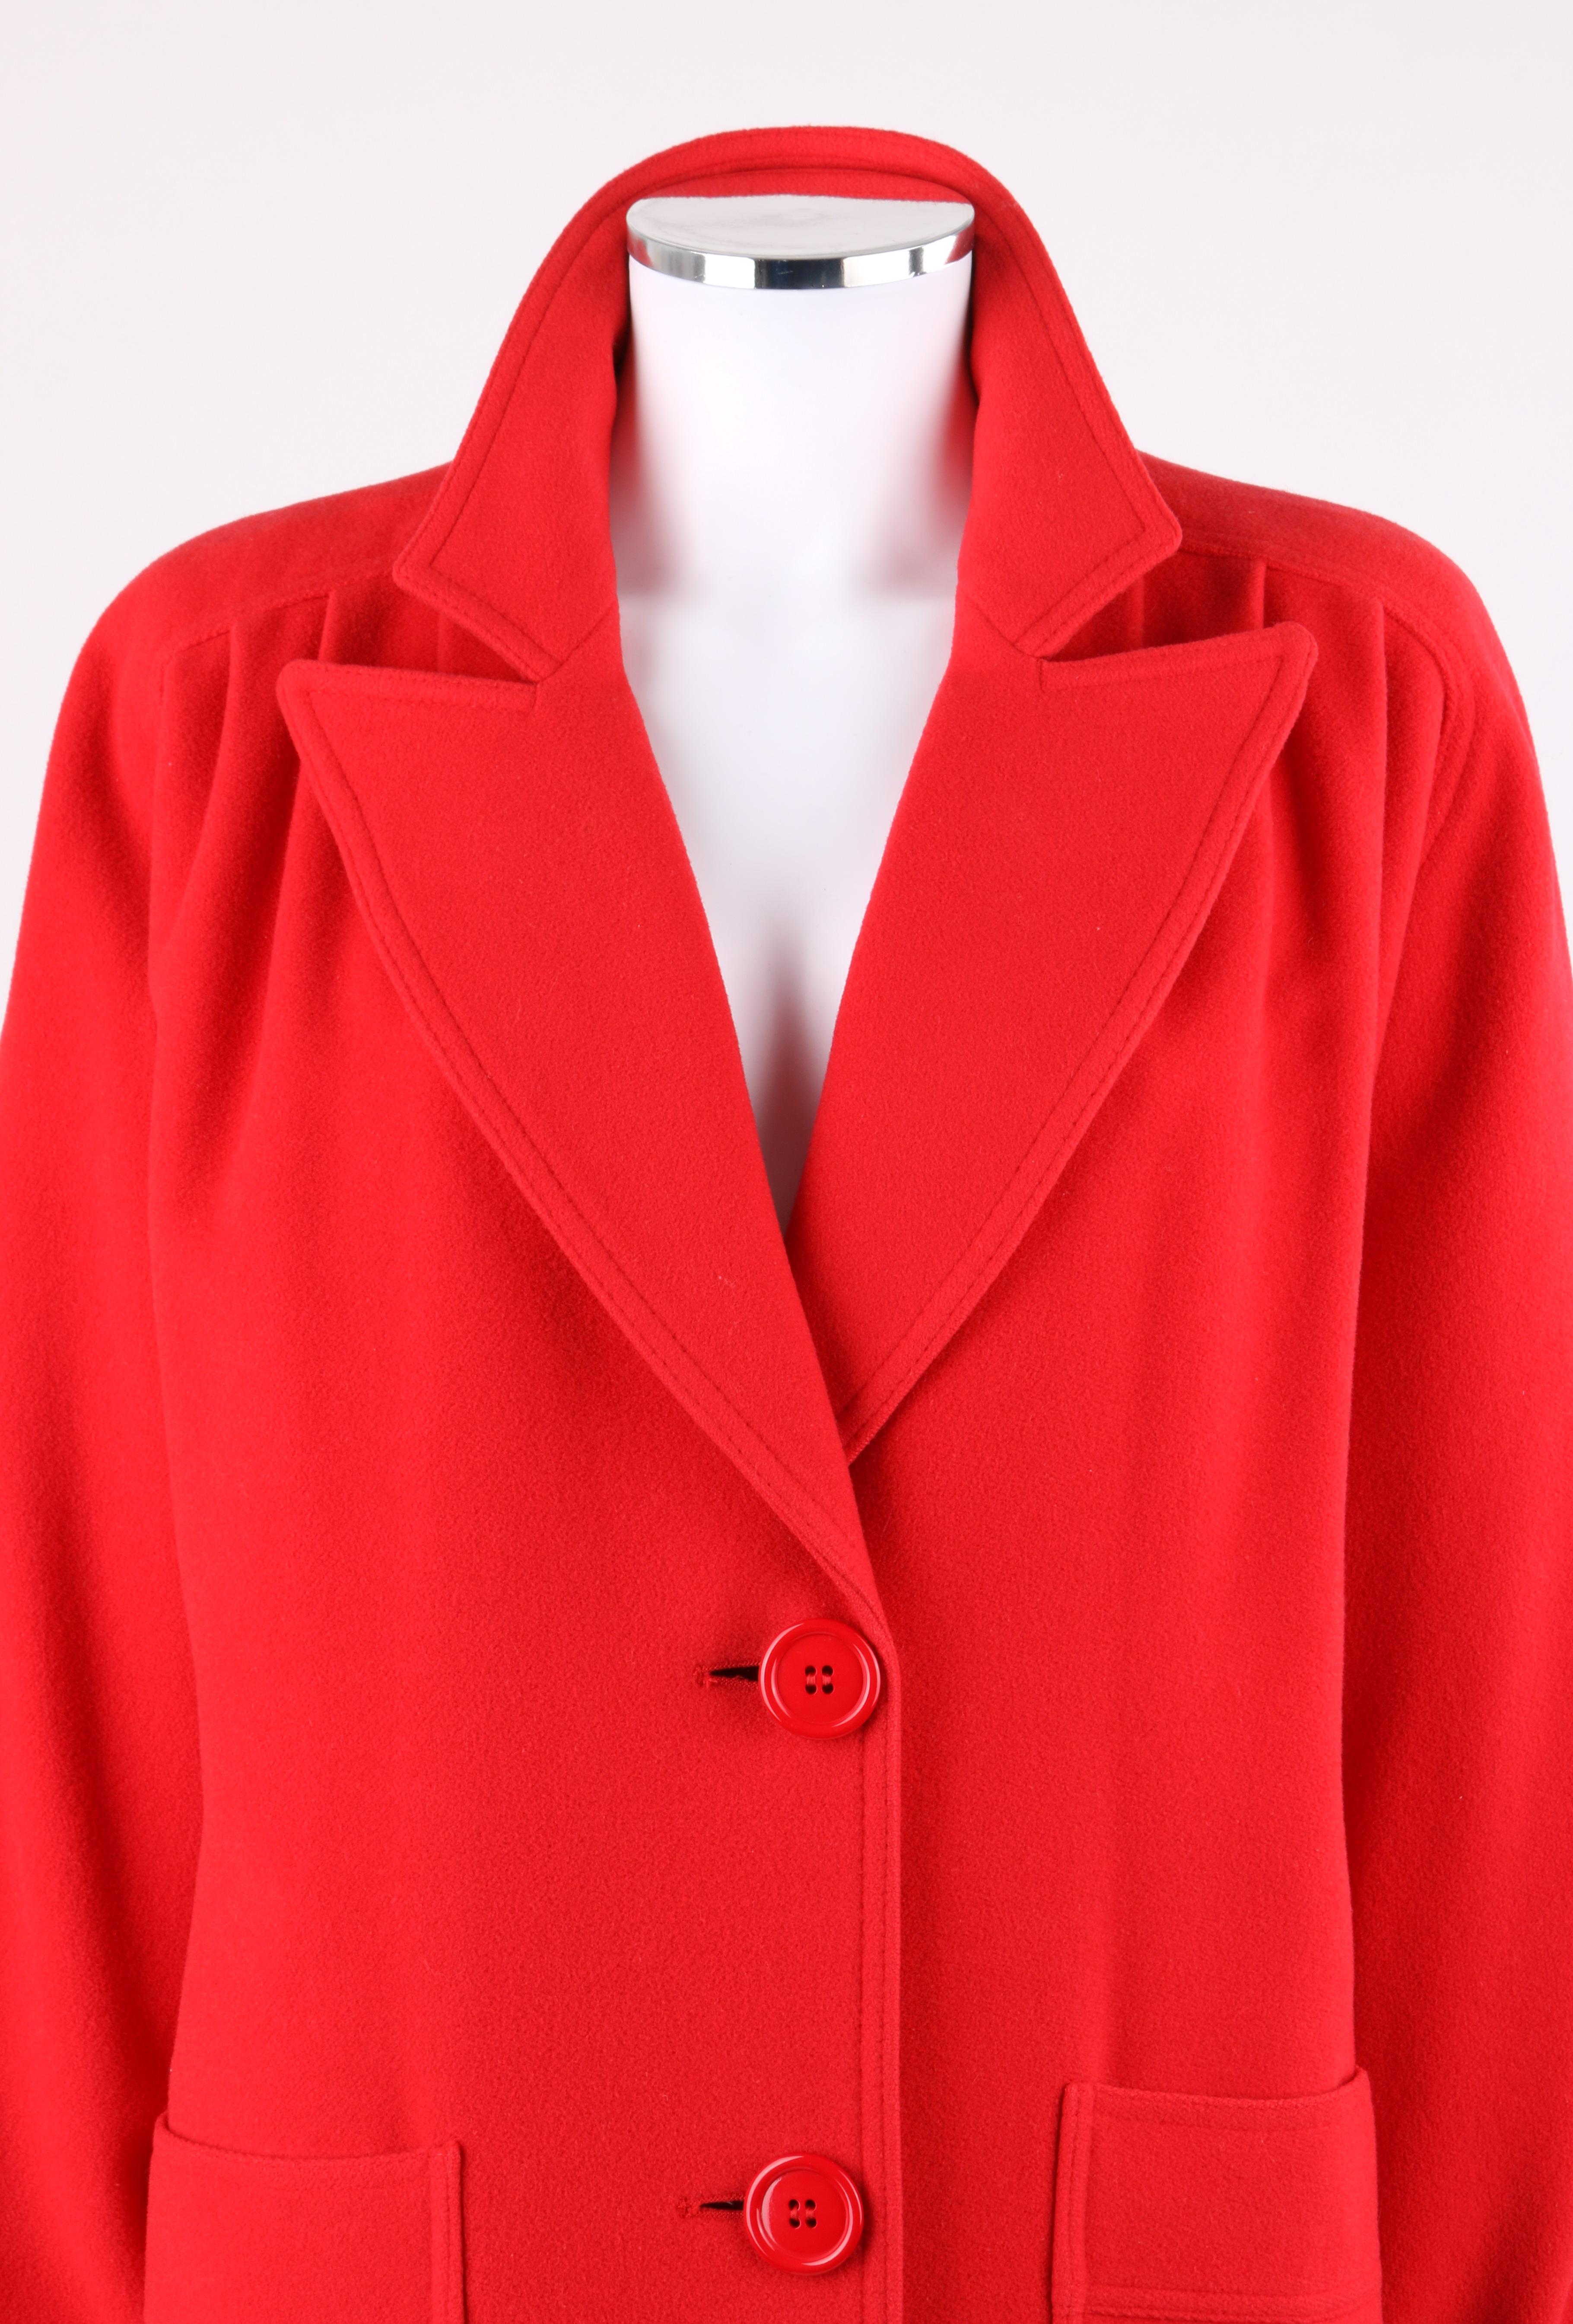 DESCRIPTION: VALENTINO Miss V c.1980's Peak Lapel Collar Oversized Cocoon Coat
 
Circa: c.1980’s
Label(s): Valentino Miss V; I.Magnin
Designer: Valentino Garavani
Style: Cocoon coat
Color(s): Red
Lined: Yes
Marked Fabric Content: Cloth: 100% Wool;